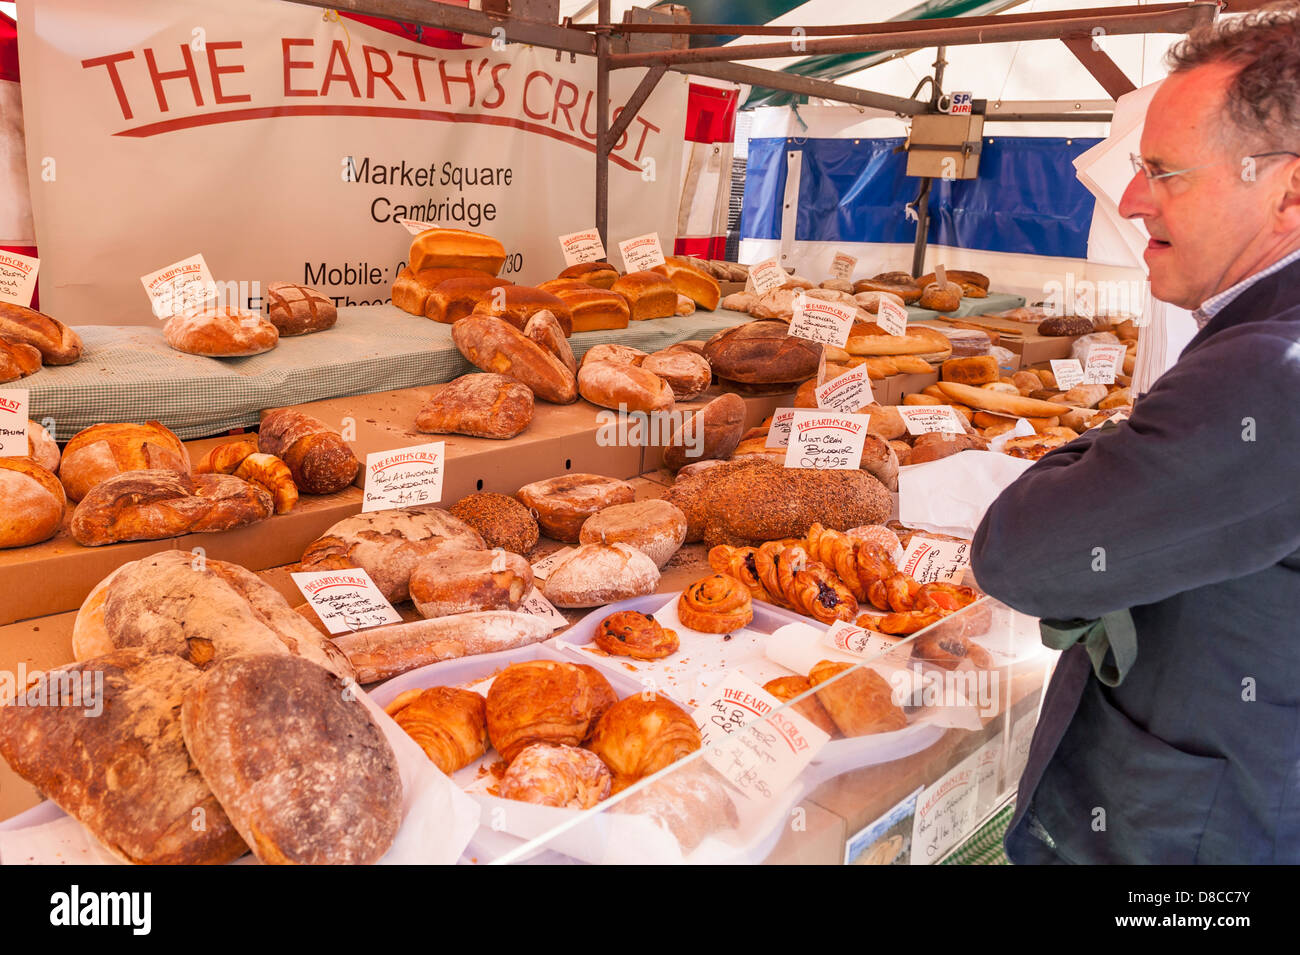 The Earth's Crust bakery with bread for sale on the market in Cambridge, England, Britain, Uk Stock Photo